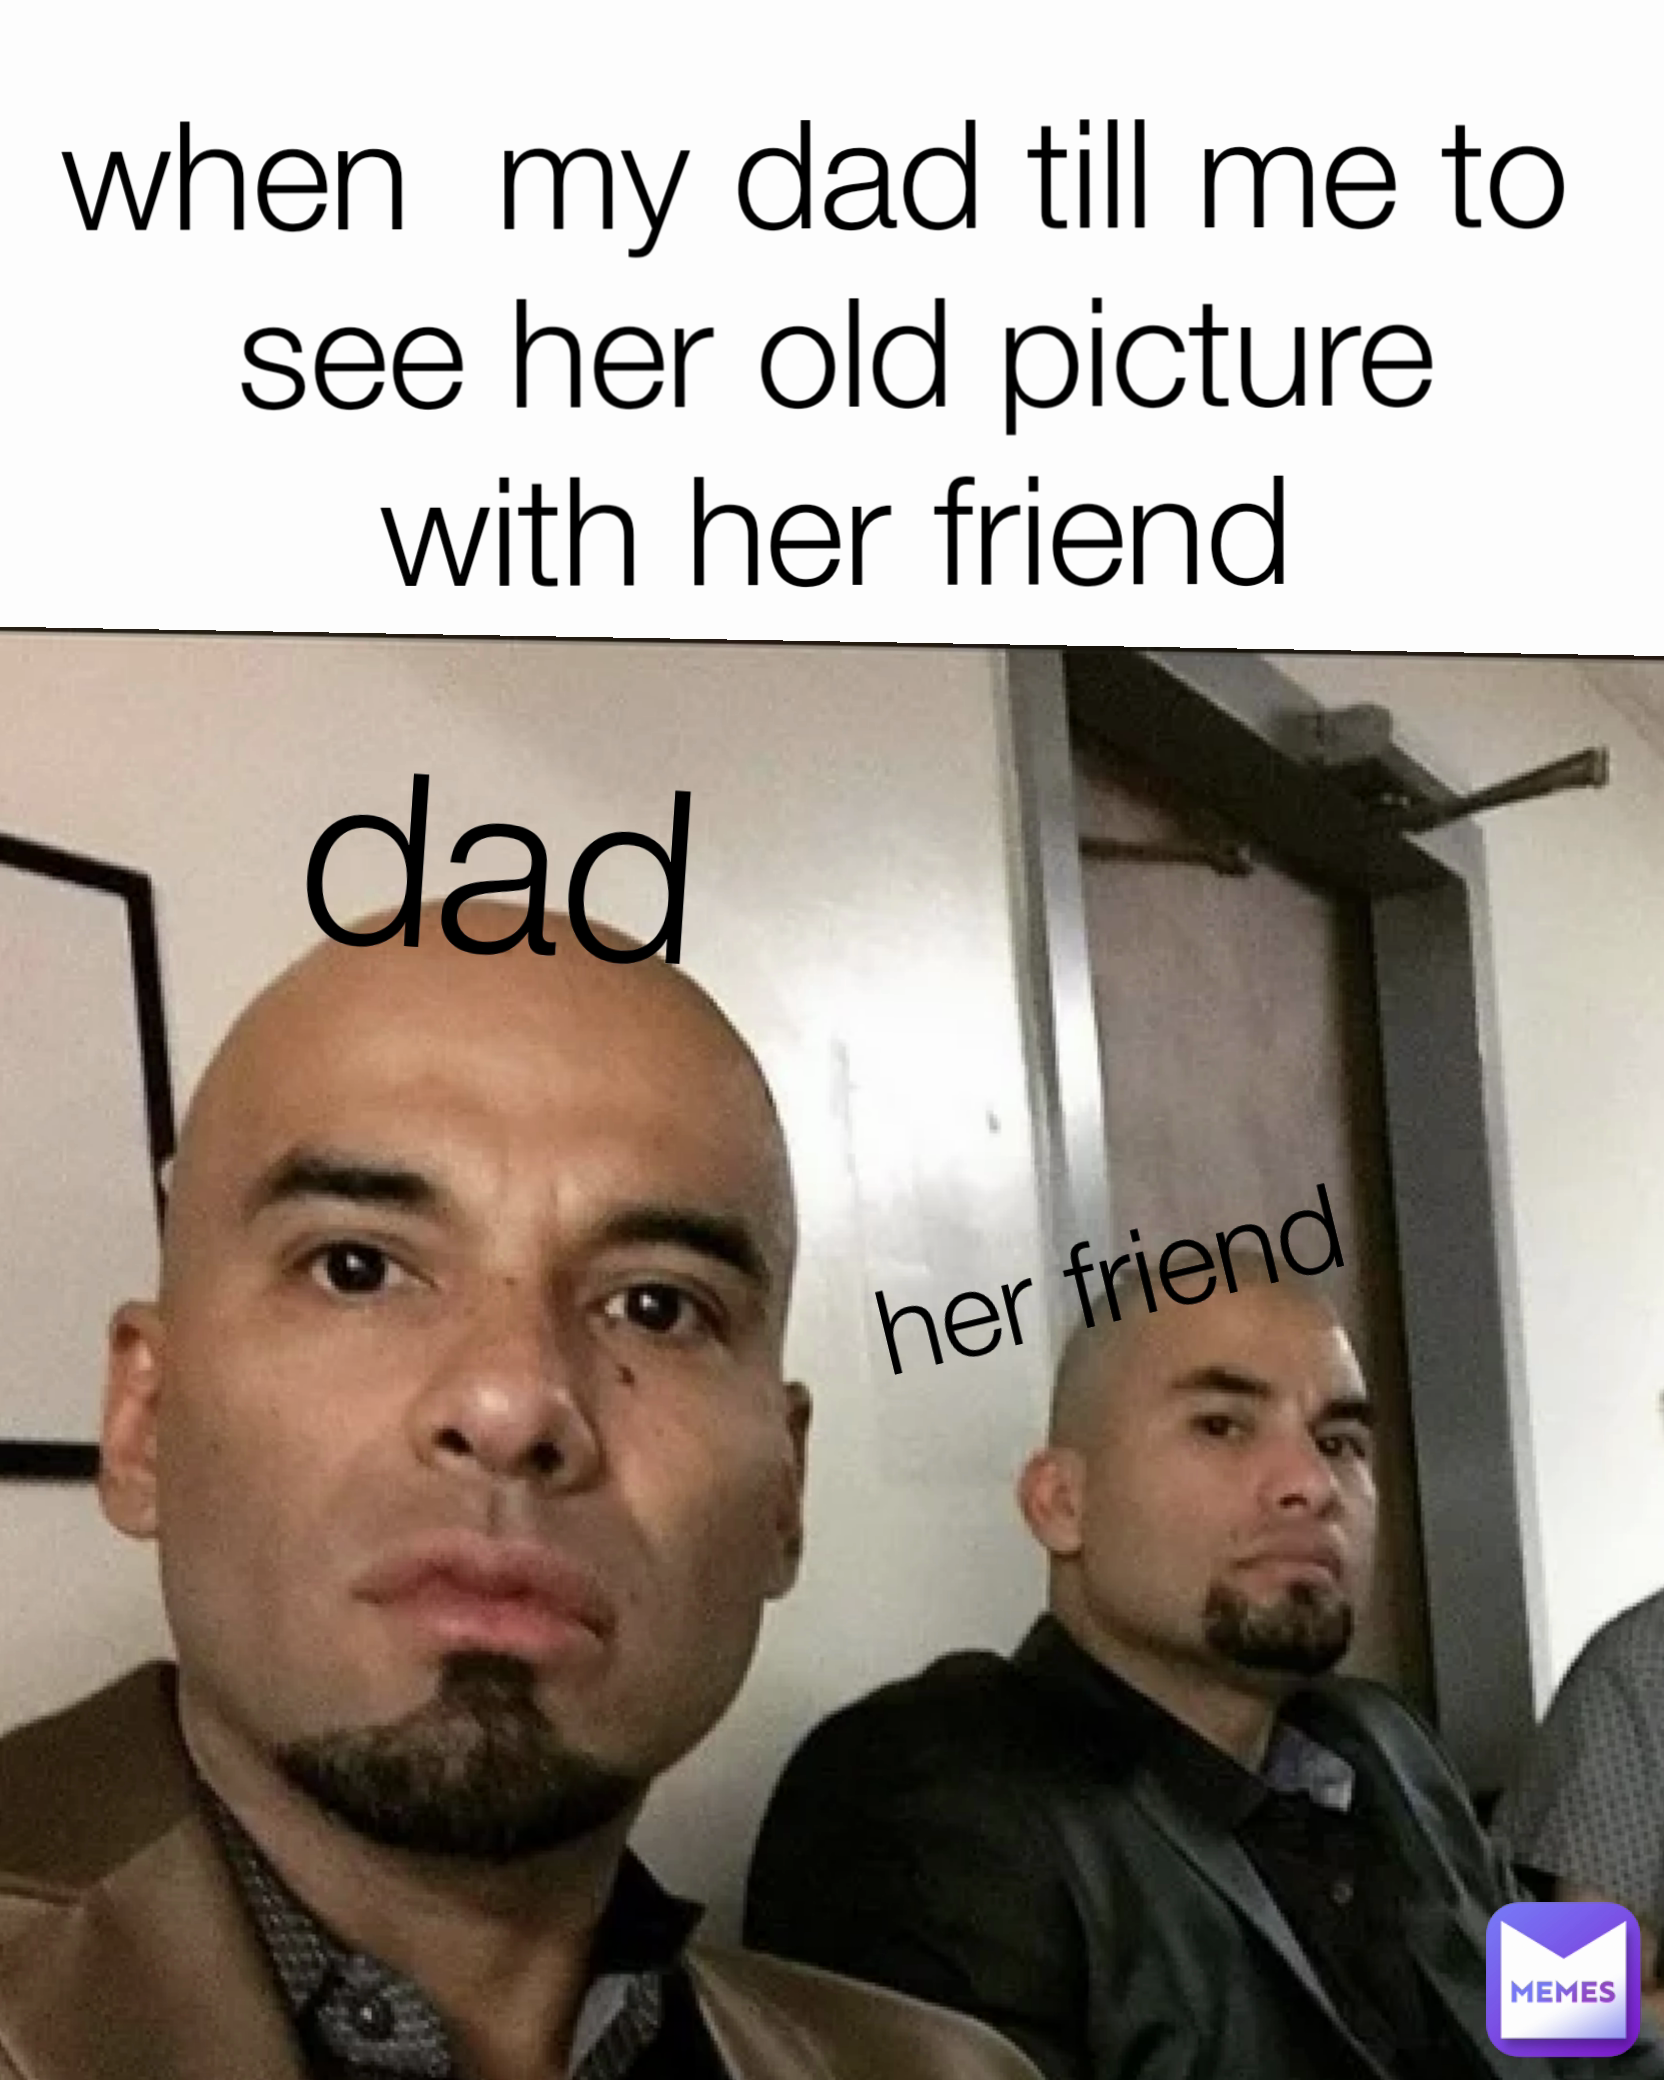 dad when  my dad till me to 
see her old picture
with her friend her friend
